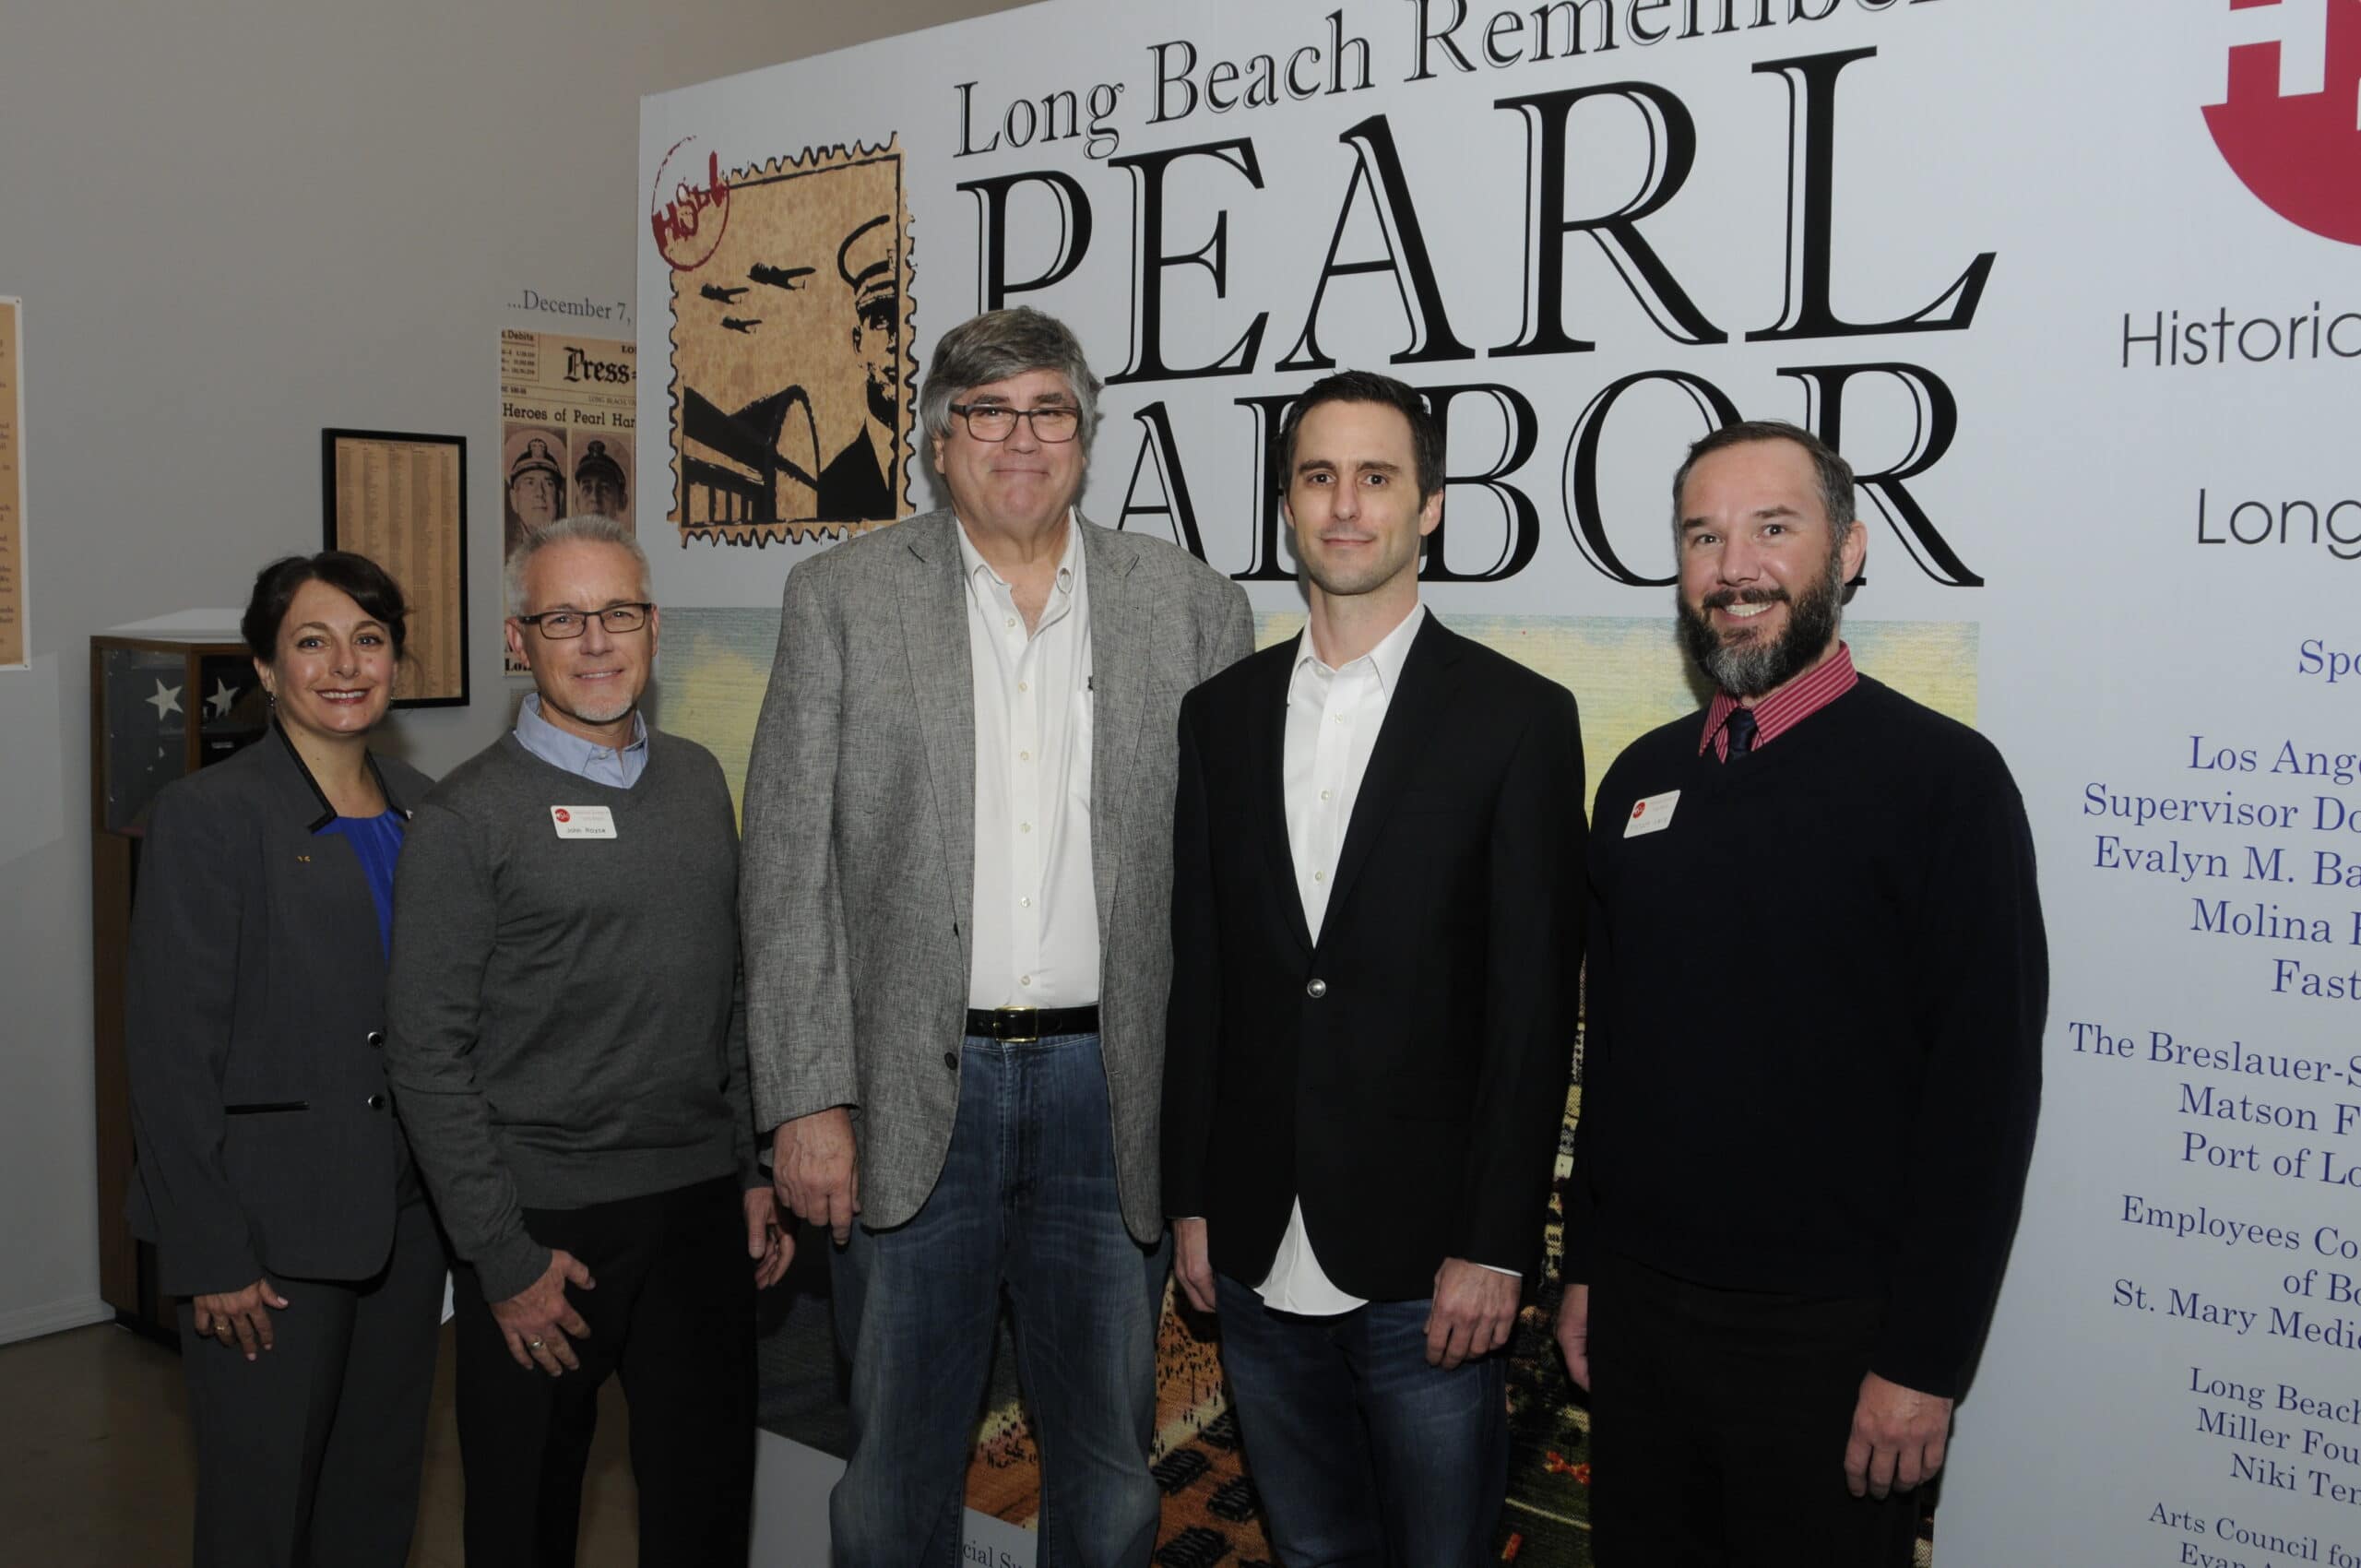 Historical society of long beach speakers for the pearl harbor opening ceremony